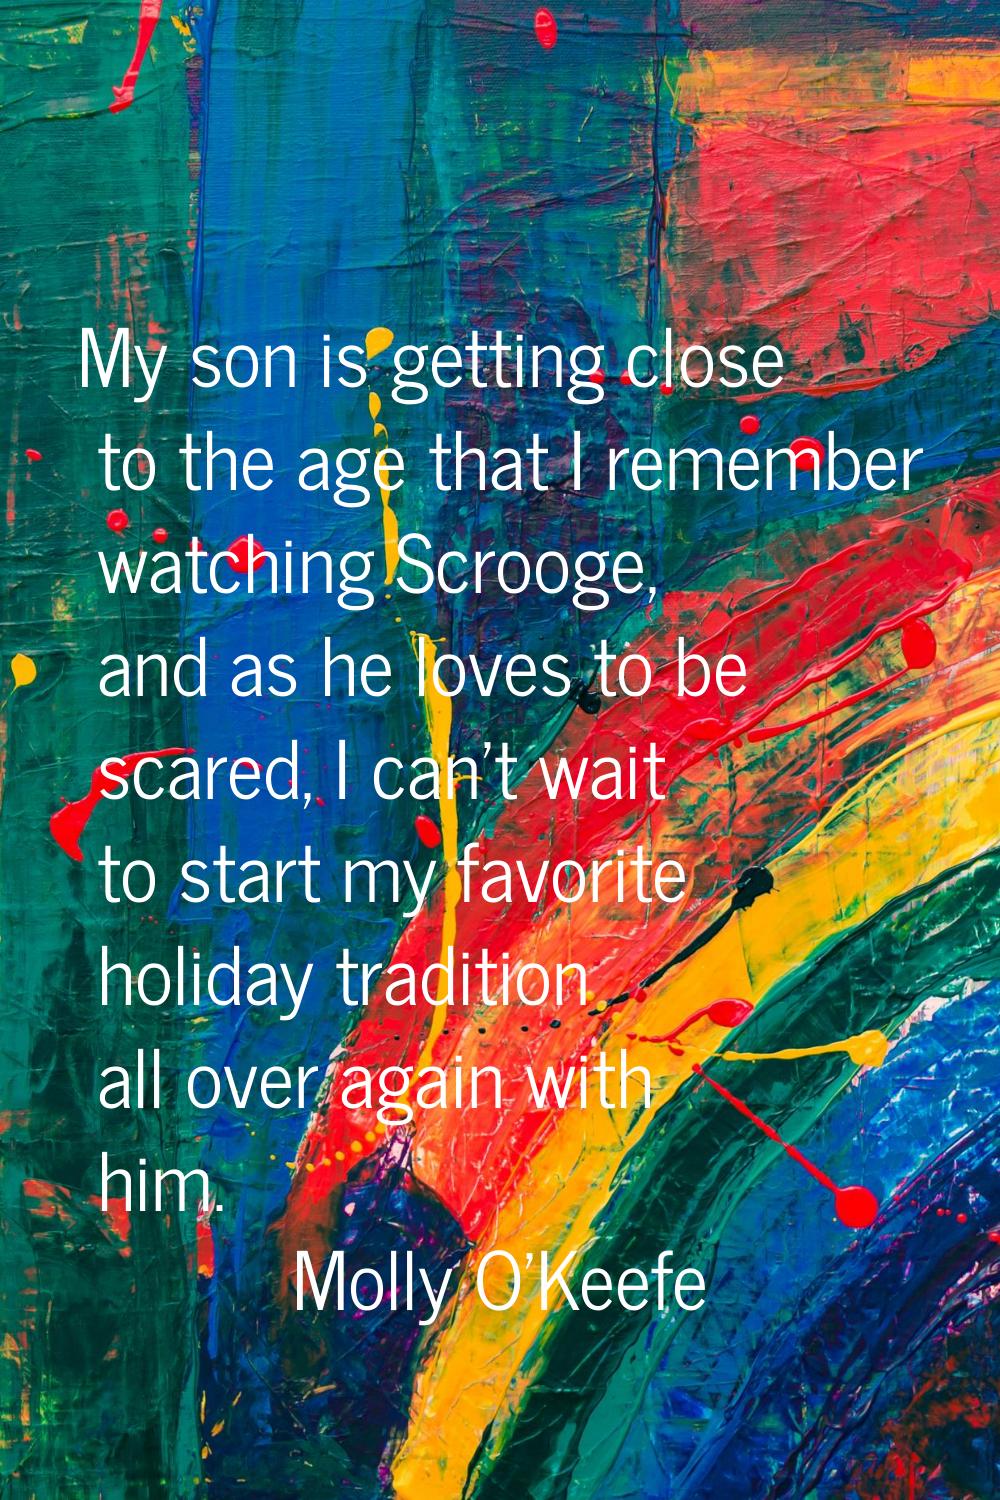 My son is getting close to the age that I remember watching Scrooge, and as he loves to be scared, 